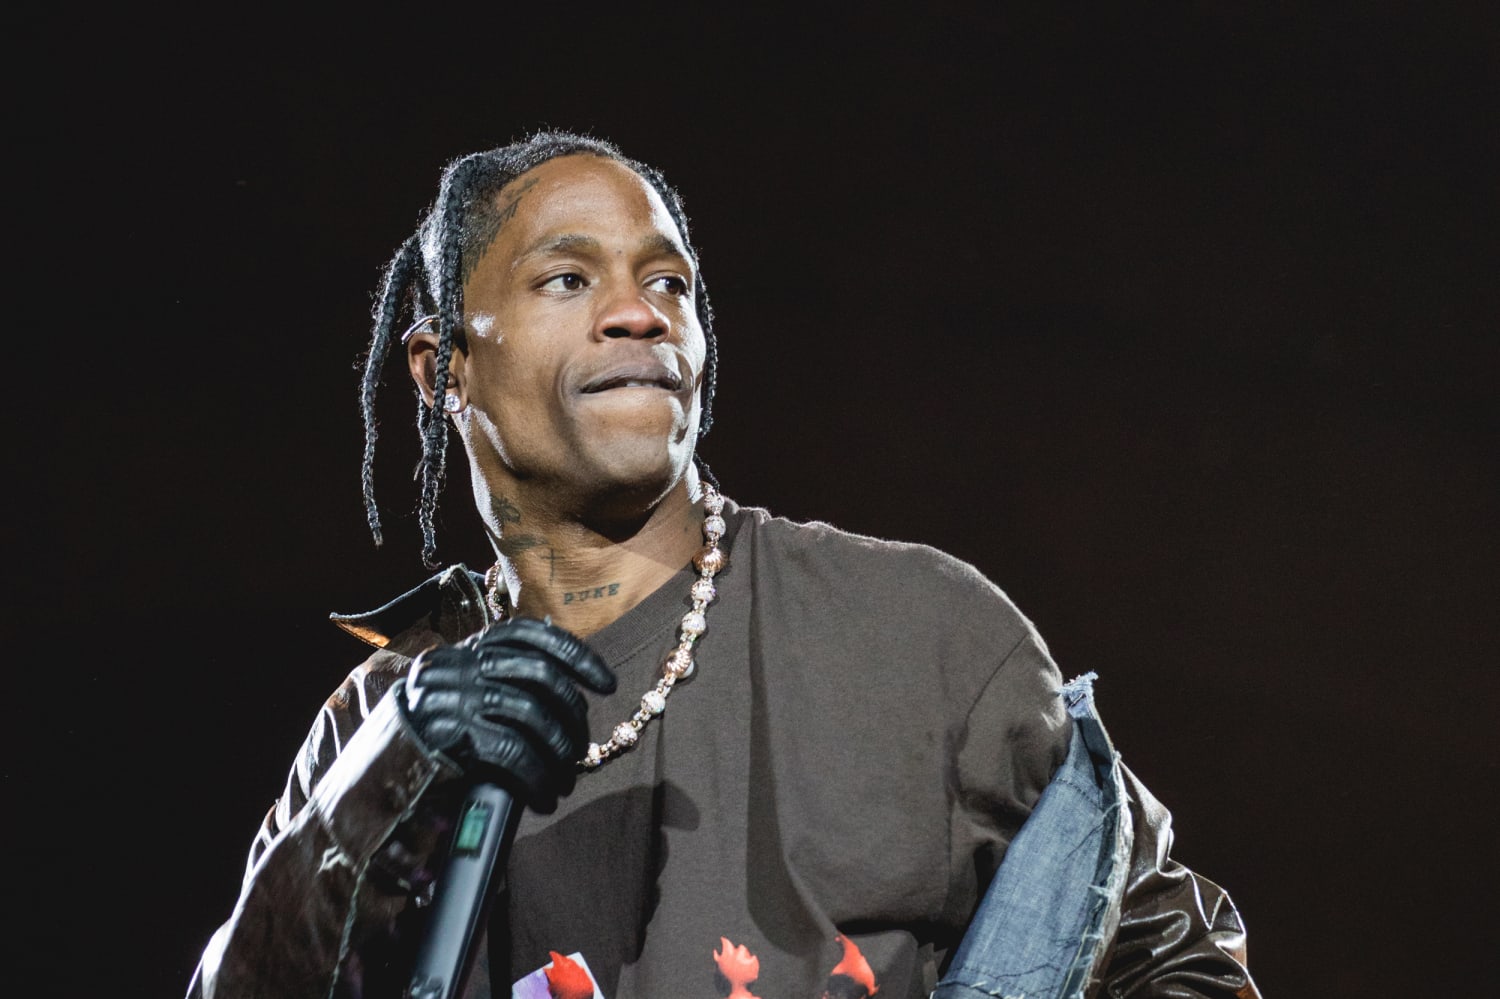 Travis Scott went to an Astroworld afterparty at Dave & Buster’s, source says